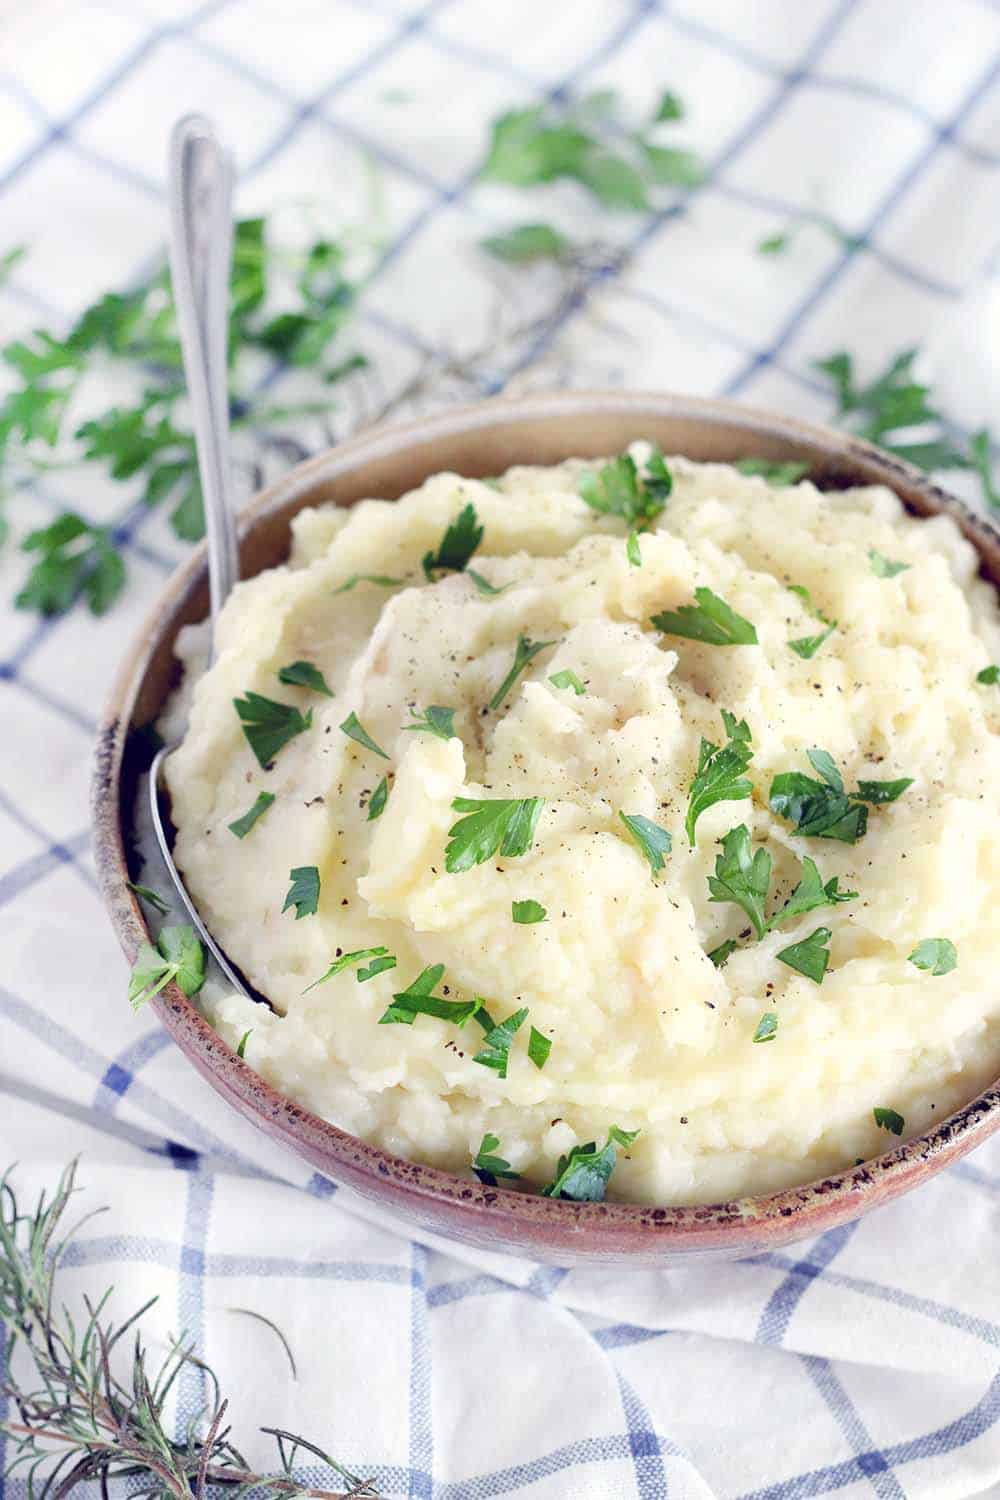 This Rosemary Infused Potato and Cauliflower Mash is a rich, earthy, wonderfully delicious, lower carb alternative to traditional mashed potatoes! Perfect for your Thanksgiving or holiday table.